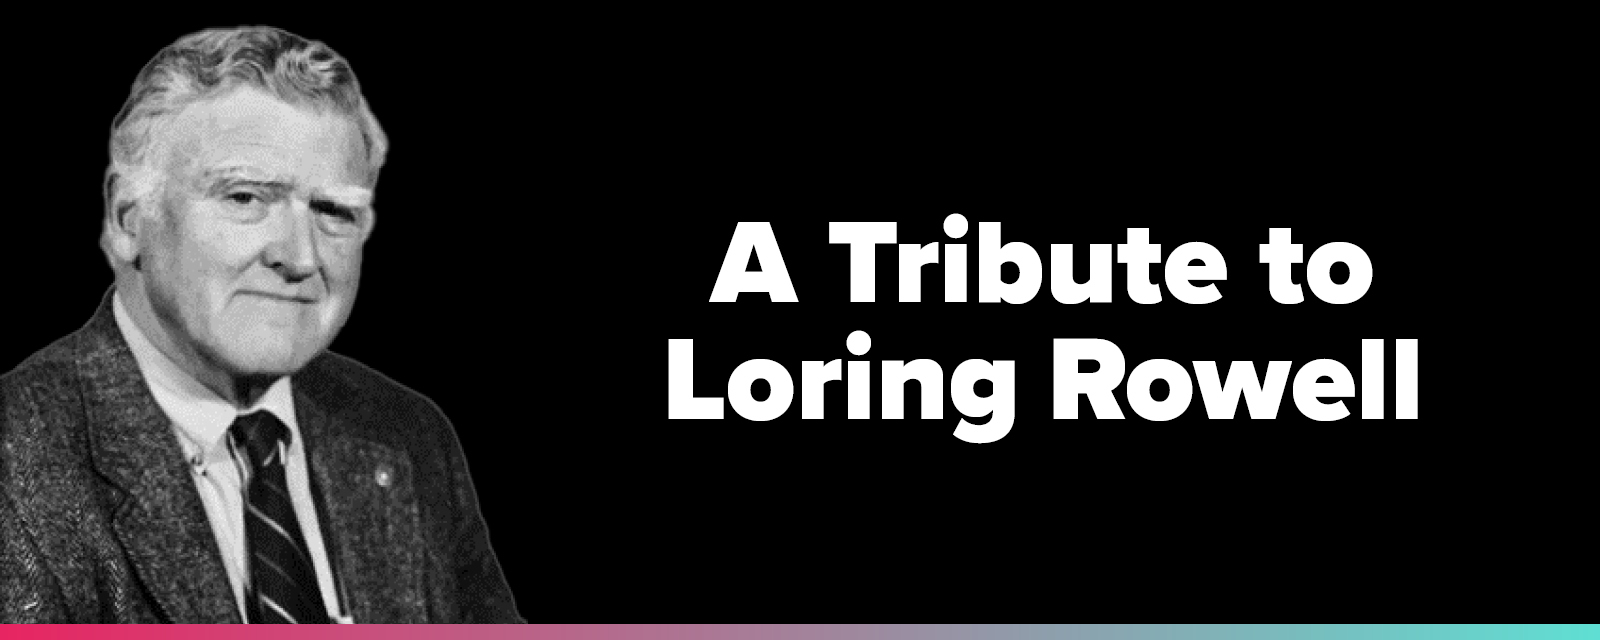 Tribute to Loring Rowell 1600x640